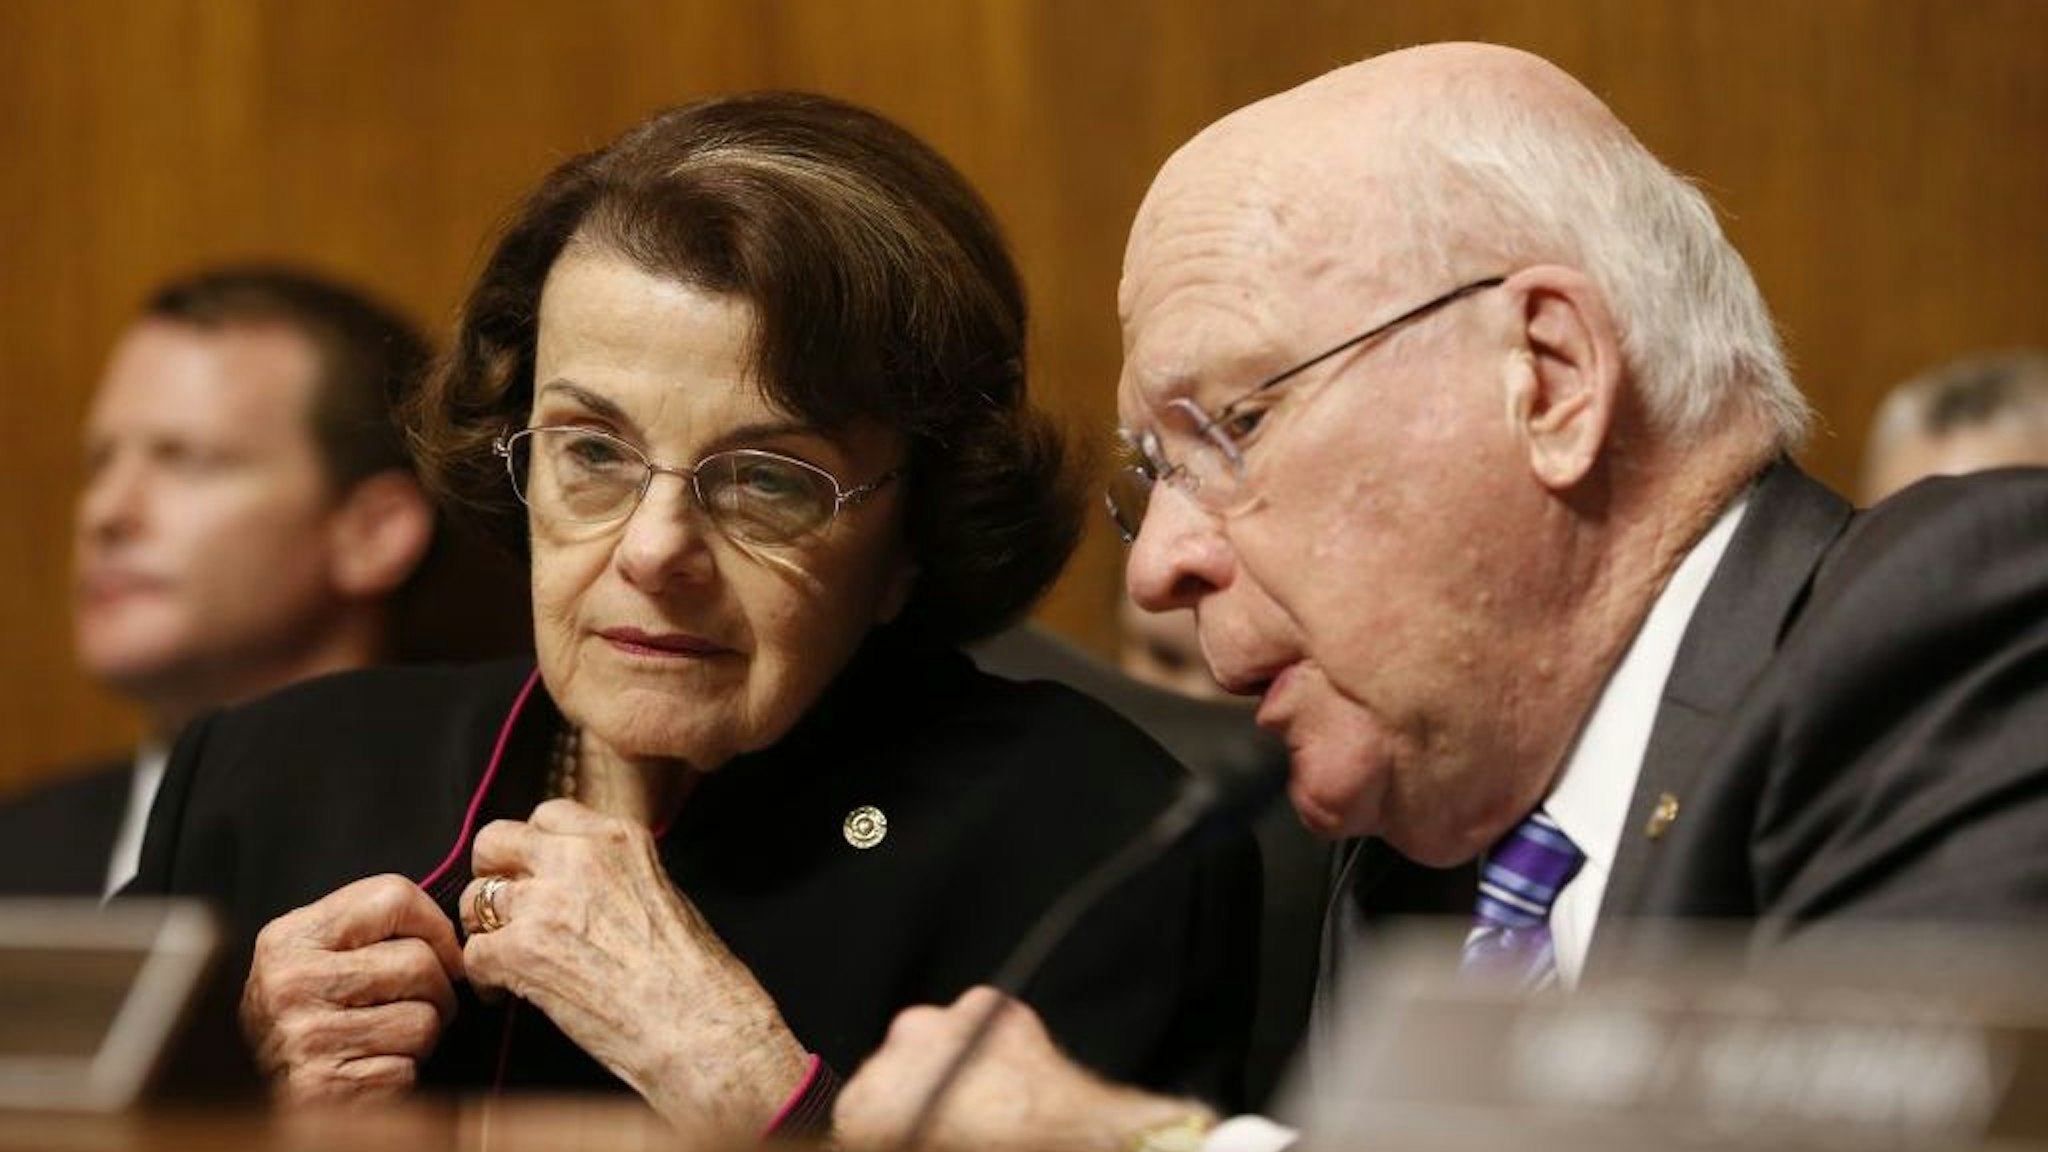 Senator Dianna Feinstein (D-CA) and Senator Patrick Leahy (D-VT) chat as Dr. Christine Blasey Ford speaks at the Senate Judiciary Committee hearing on the nomination of Brett Kavanaugh to be an associate justice of the Supreme Court of the United States, on Capitol Hill in Washington, DC, on September 27, 2018. (Photo by MICHAEL REYNOLDS / POOL / AFP) (Photo by MICHAEL REYNOLDS/POOL/AFP via Getty Images)